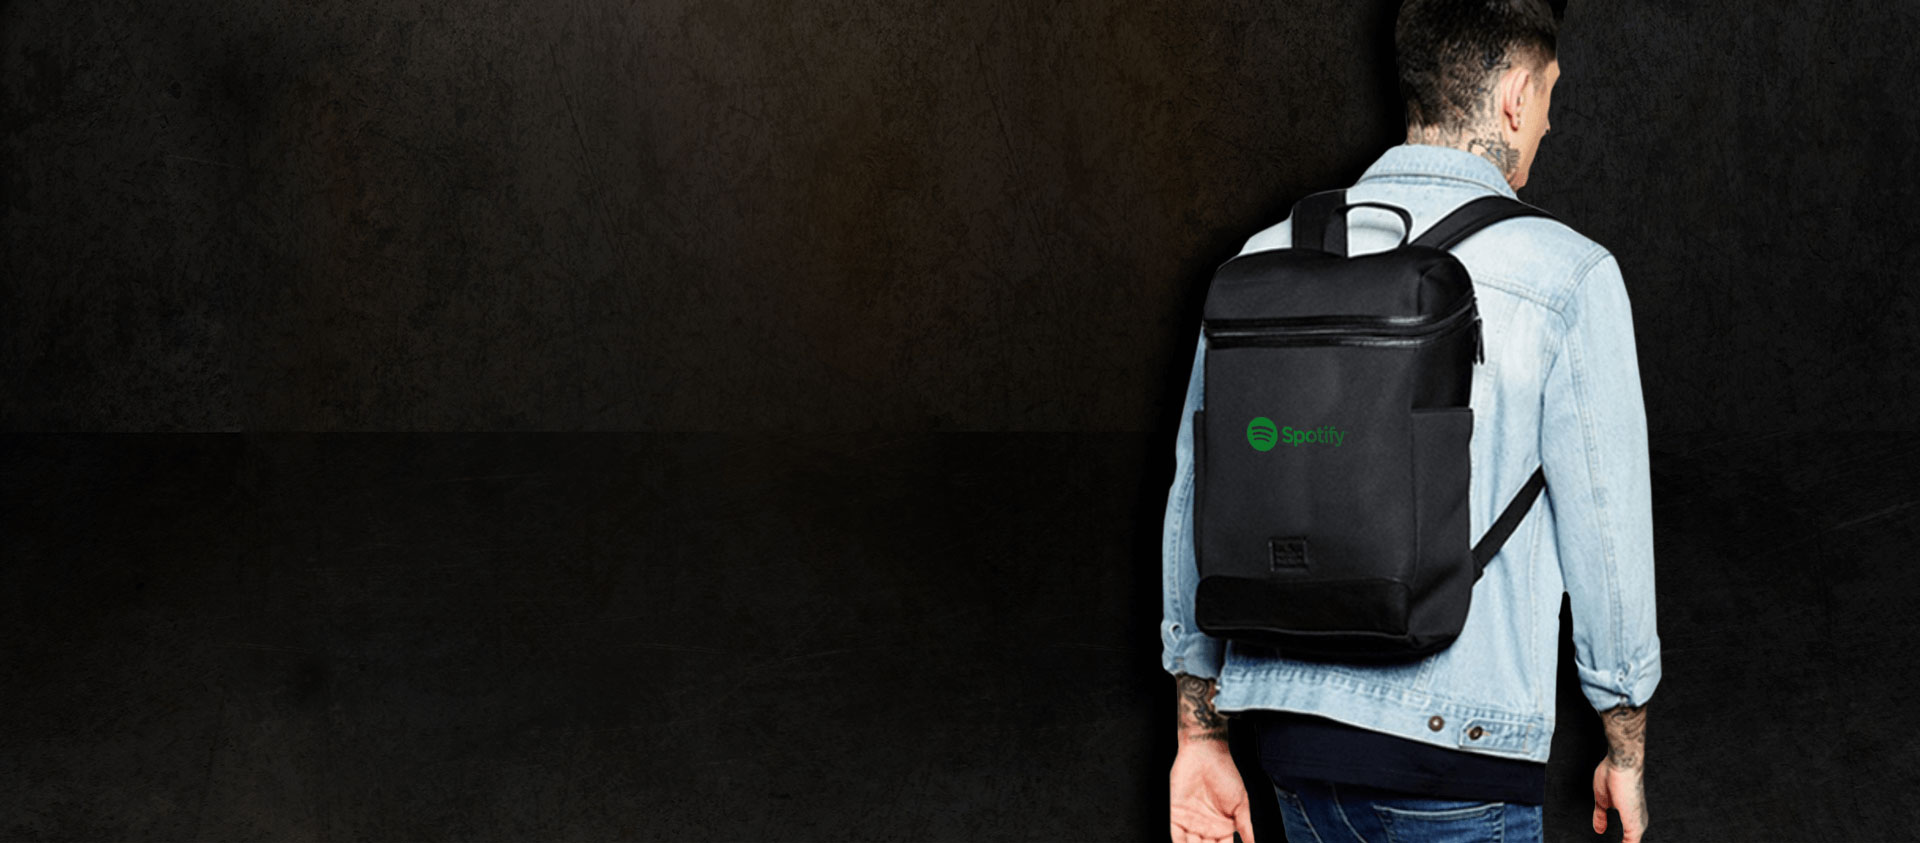 Man wearing a custom printed backpack branded with company design